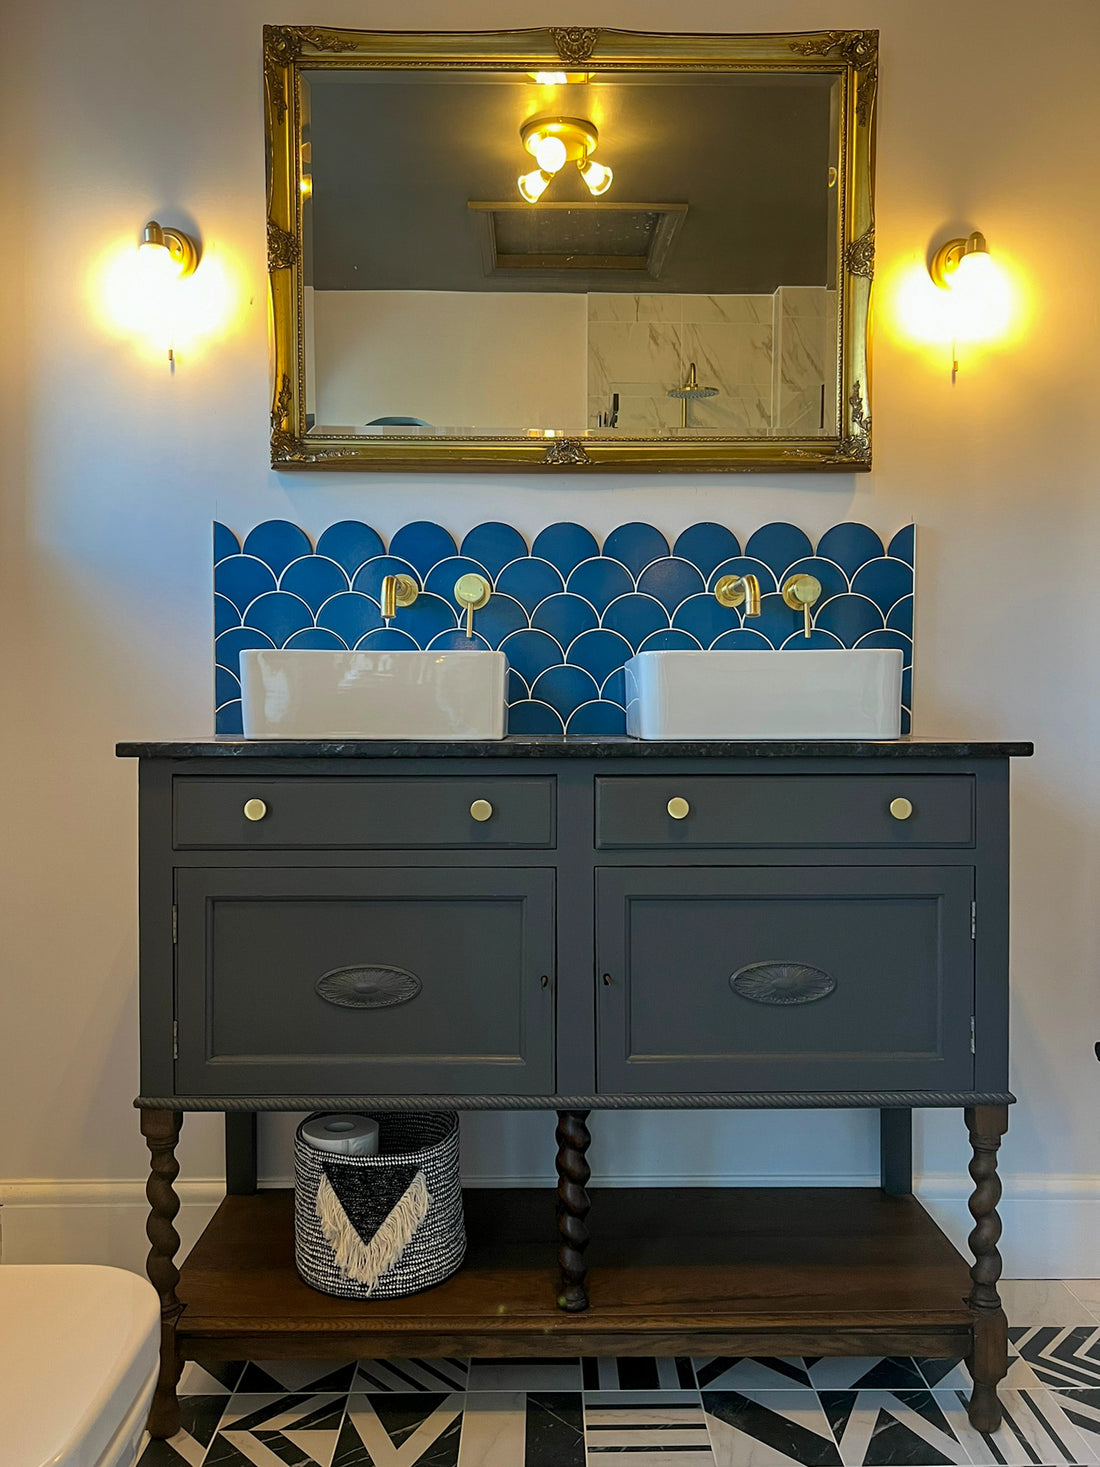 Three Reasons To Consider An Upcycled Piece Of Furniture For Your Bathroom Vanity